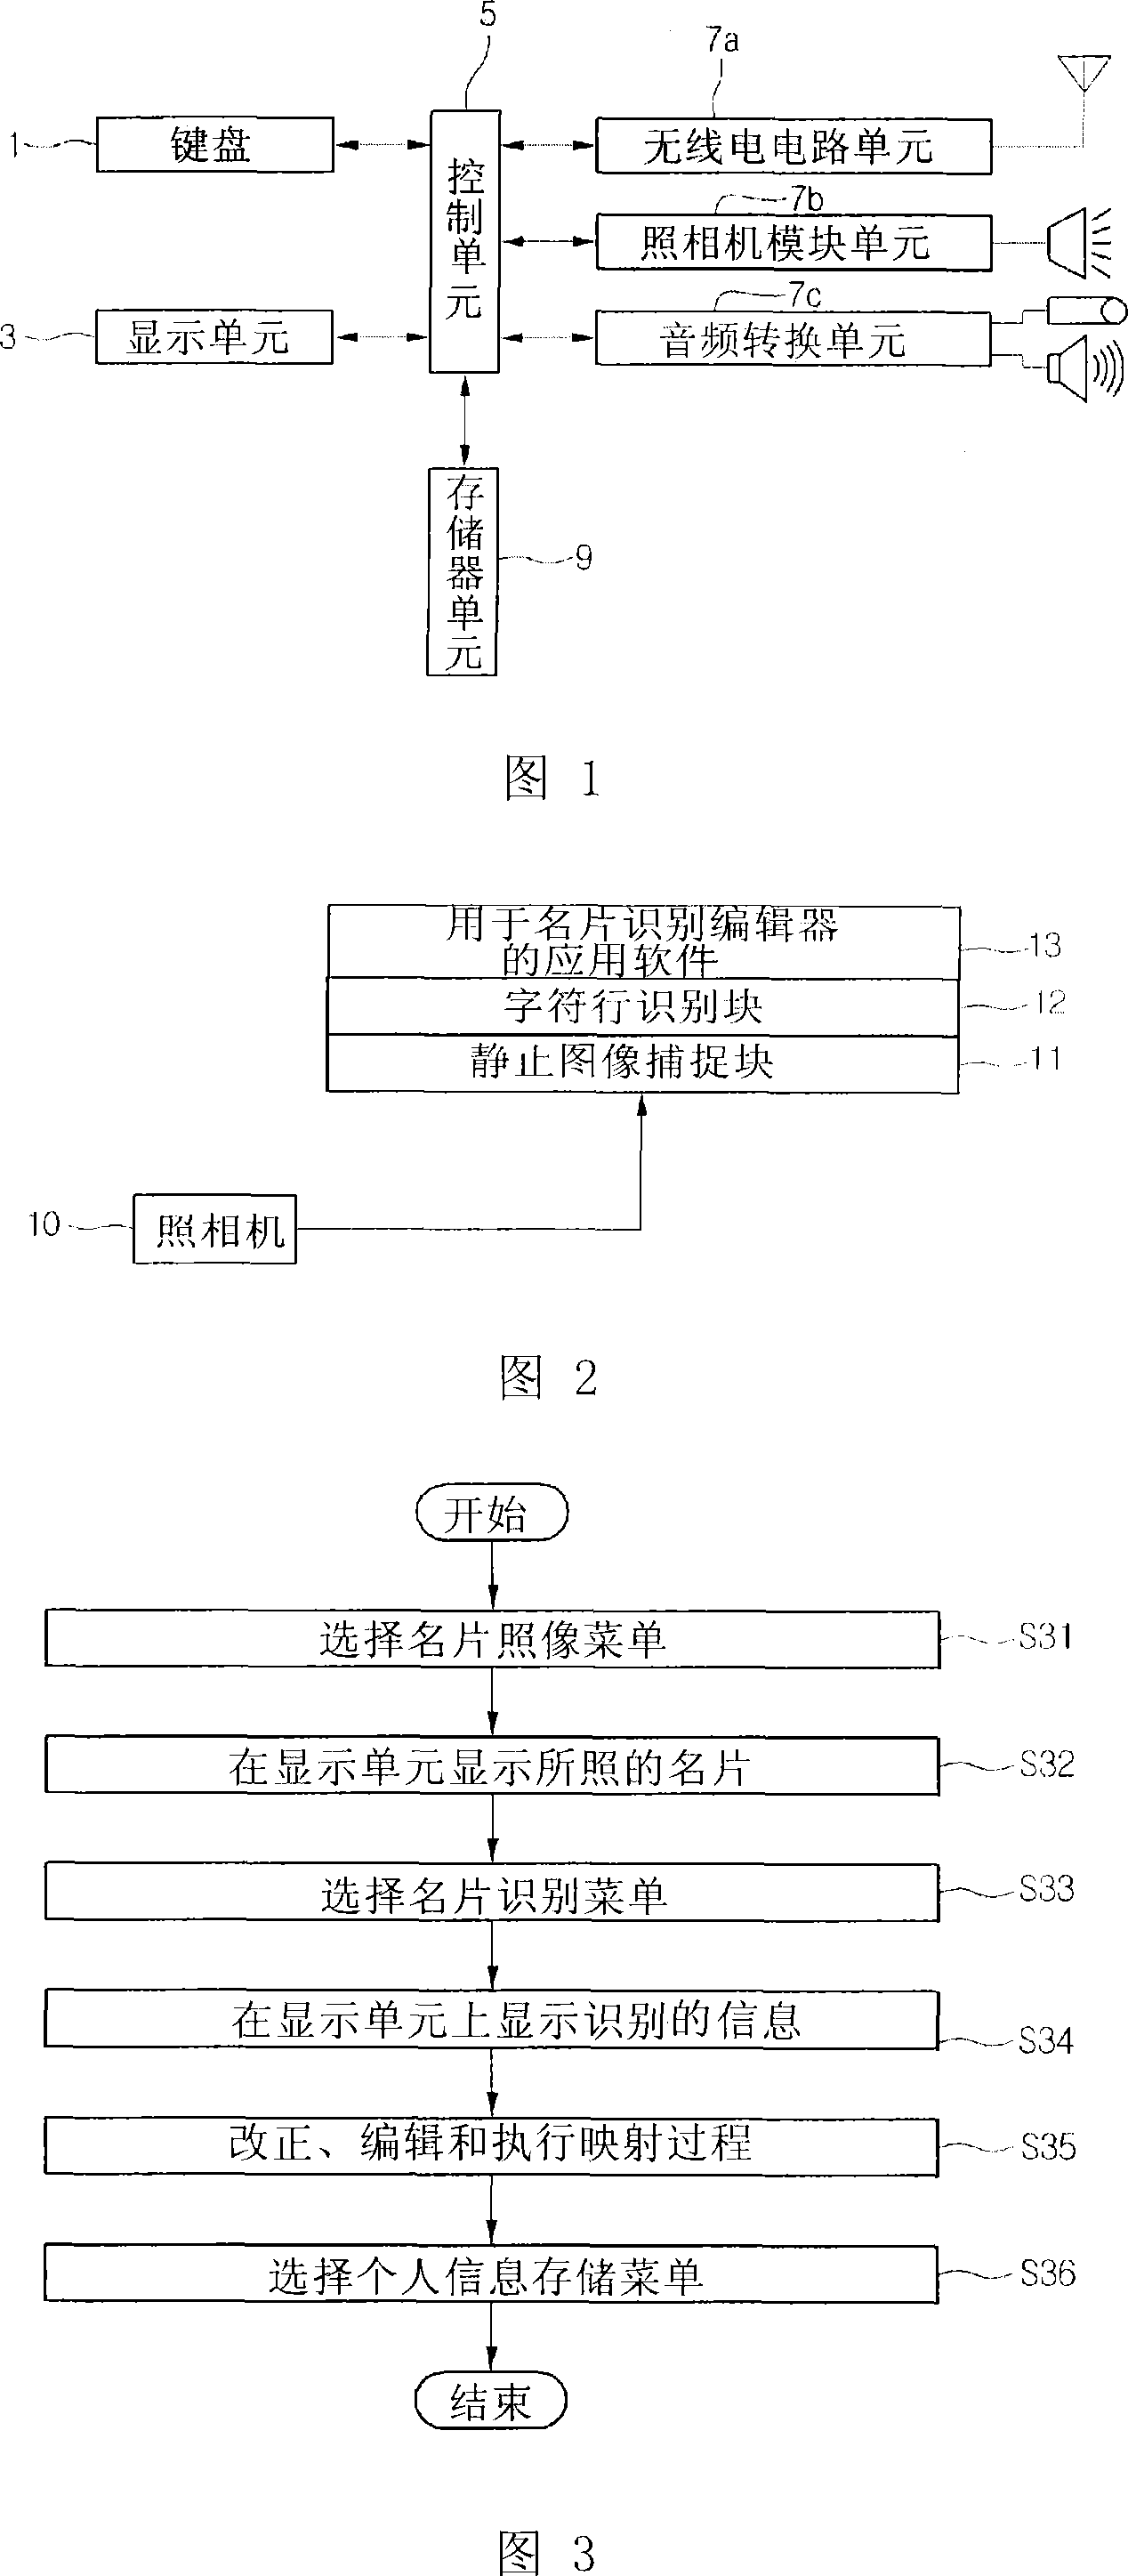 Method and apparatus for processing document image captured by camera